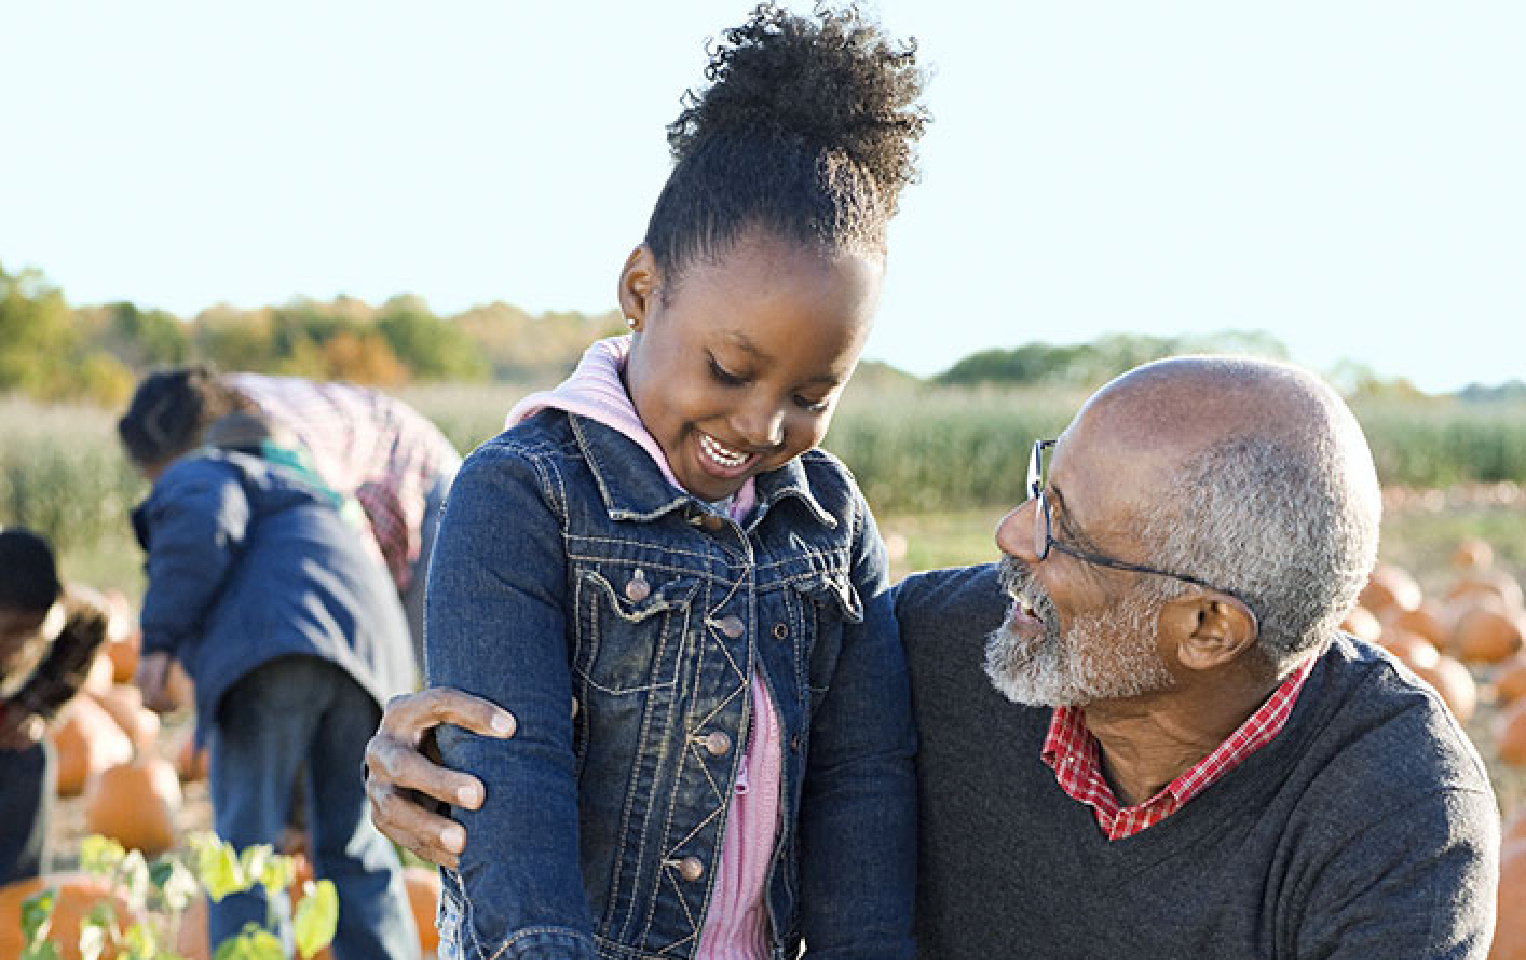 Grandfather and grandchild smiling at each other at a pumpkin patch